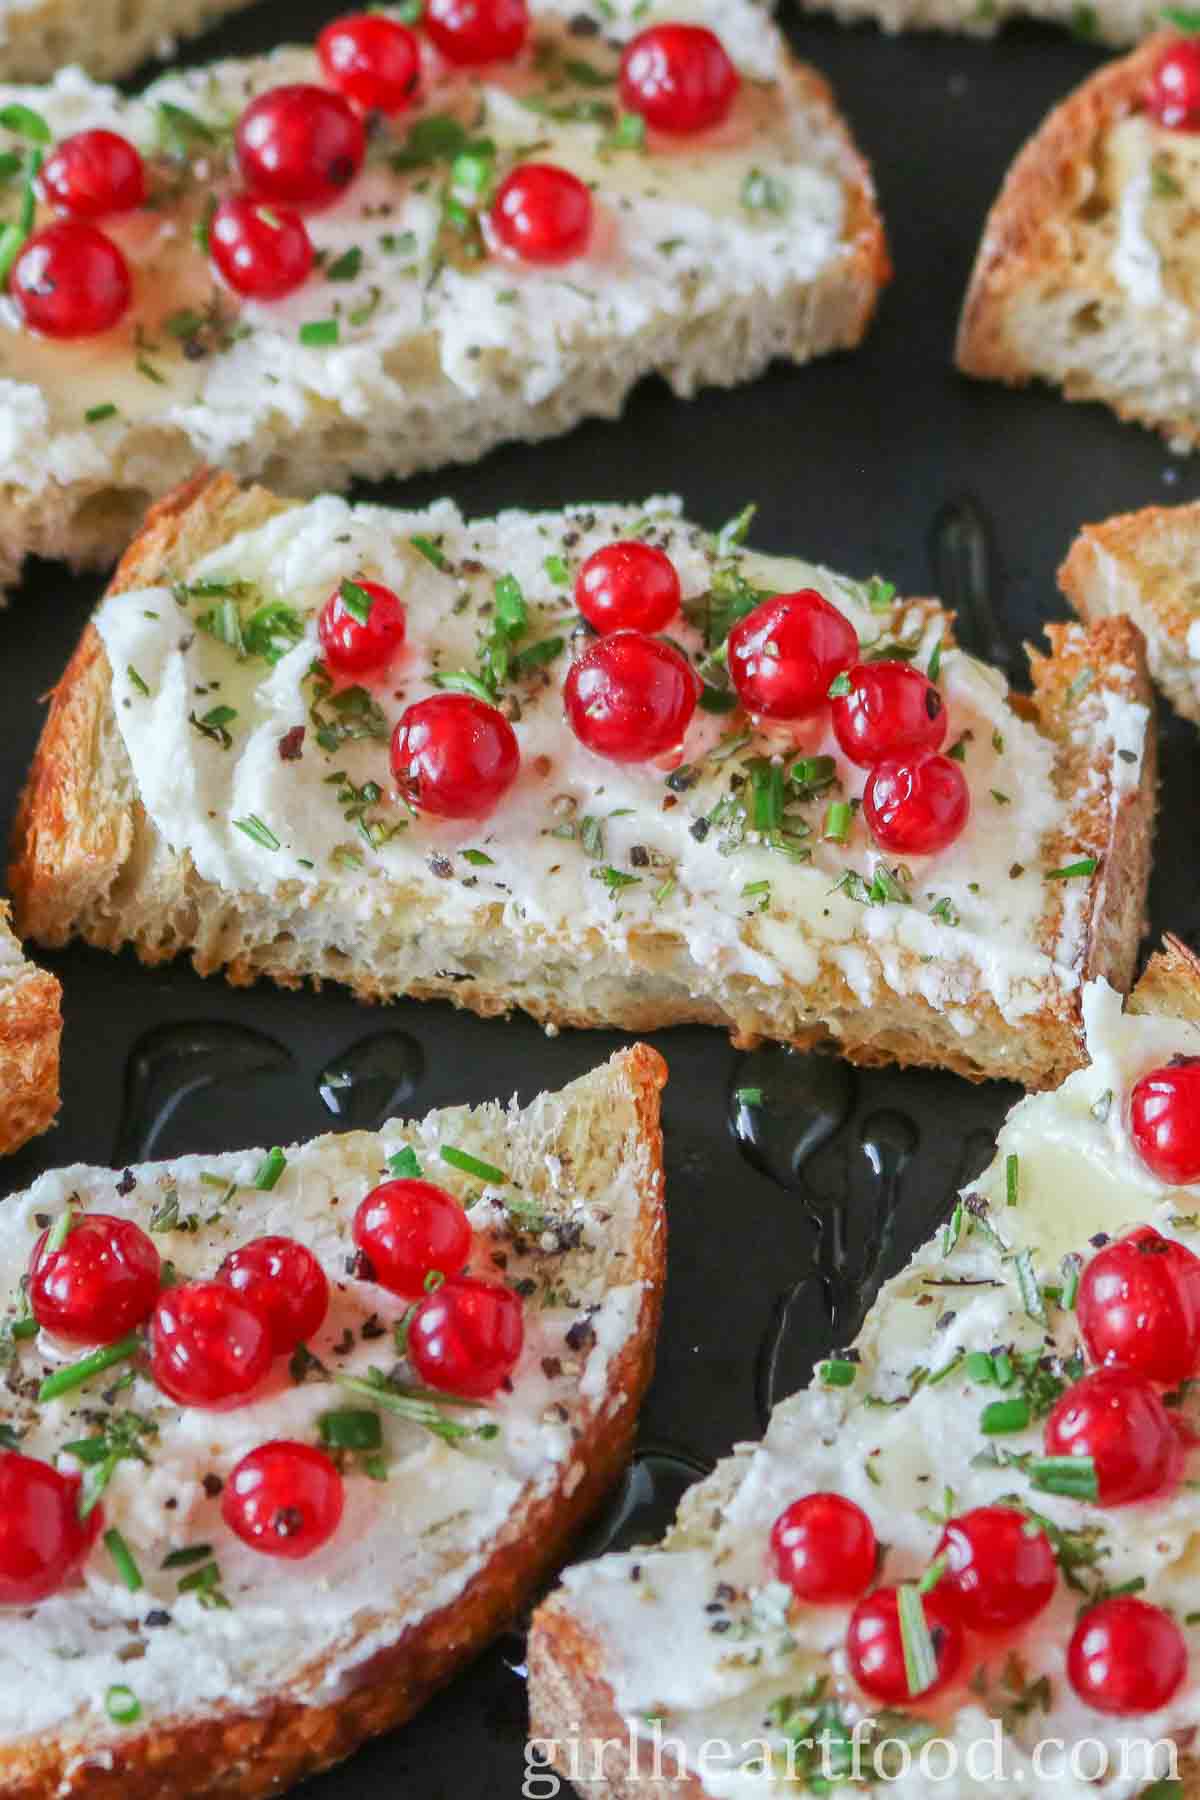 Goat cheese and red currant crostini on a black plate.